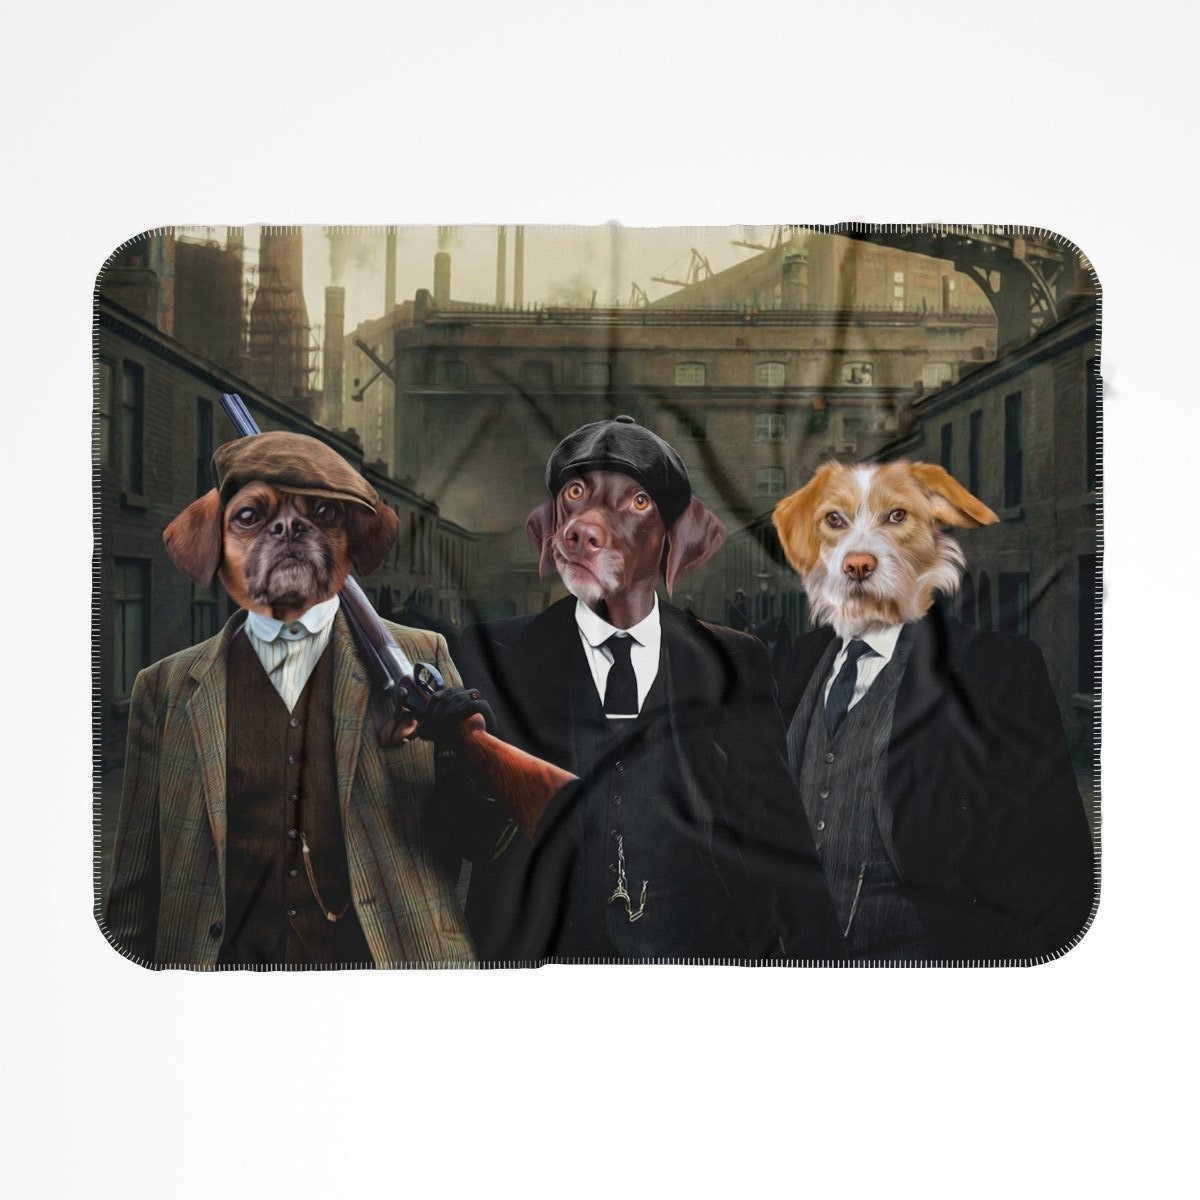 The 3 Brothers (Peaky Blinders Inspired): Custom Pet Blanket - Paw & Glory - #pet portraits# - #dog portraits# - #pet portraits uk#Pawandglory, Pet art blanket,fleece blanket for dogs, dog blanket for bed, pet fleece blanket, personalised pet blankets, personalised puppy blankets